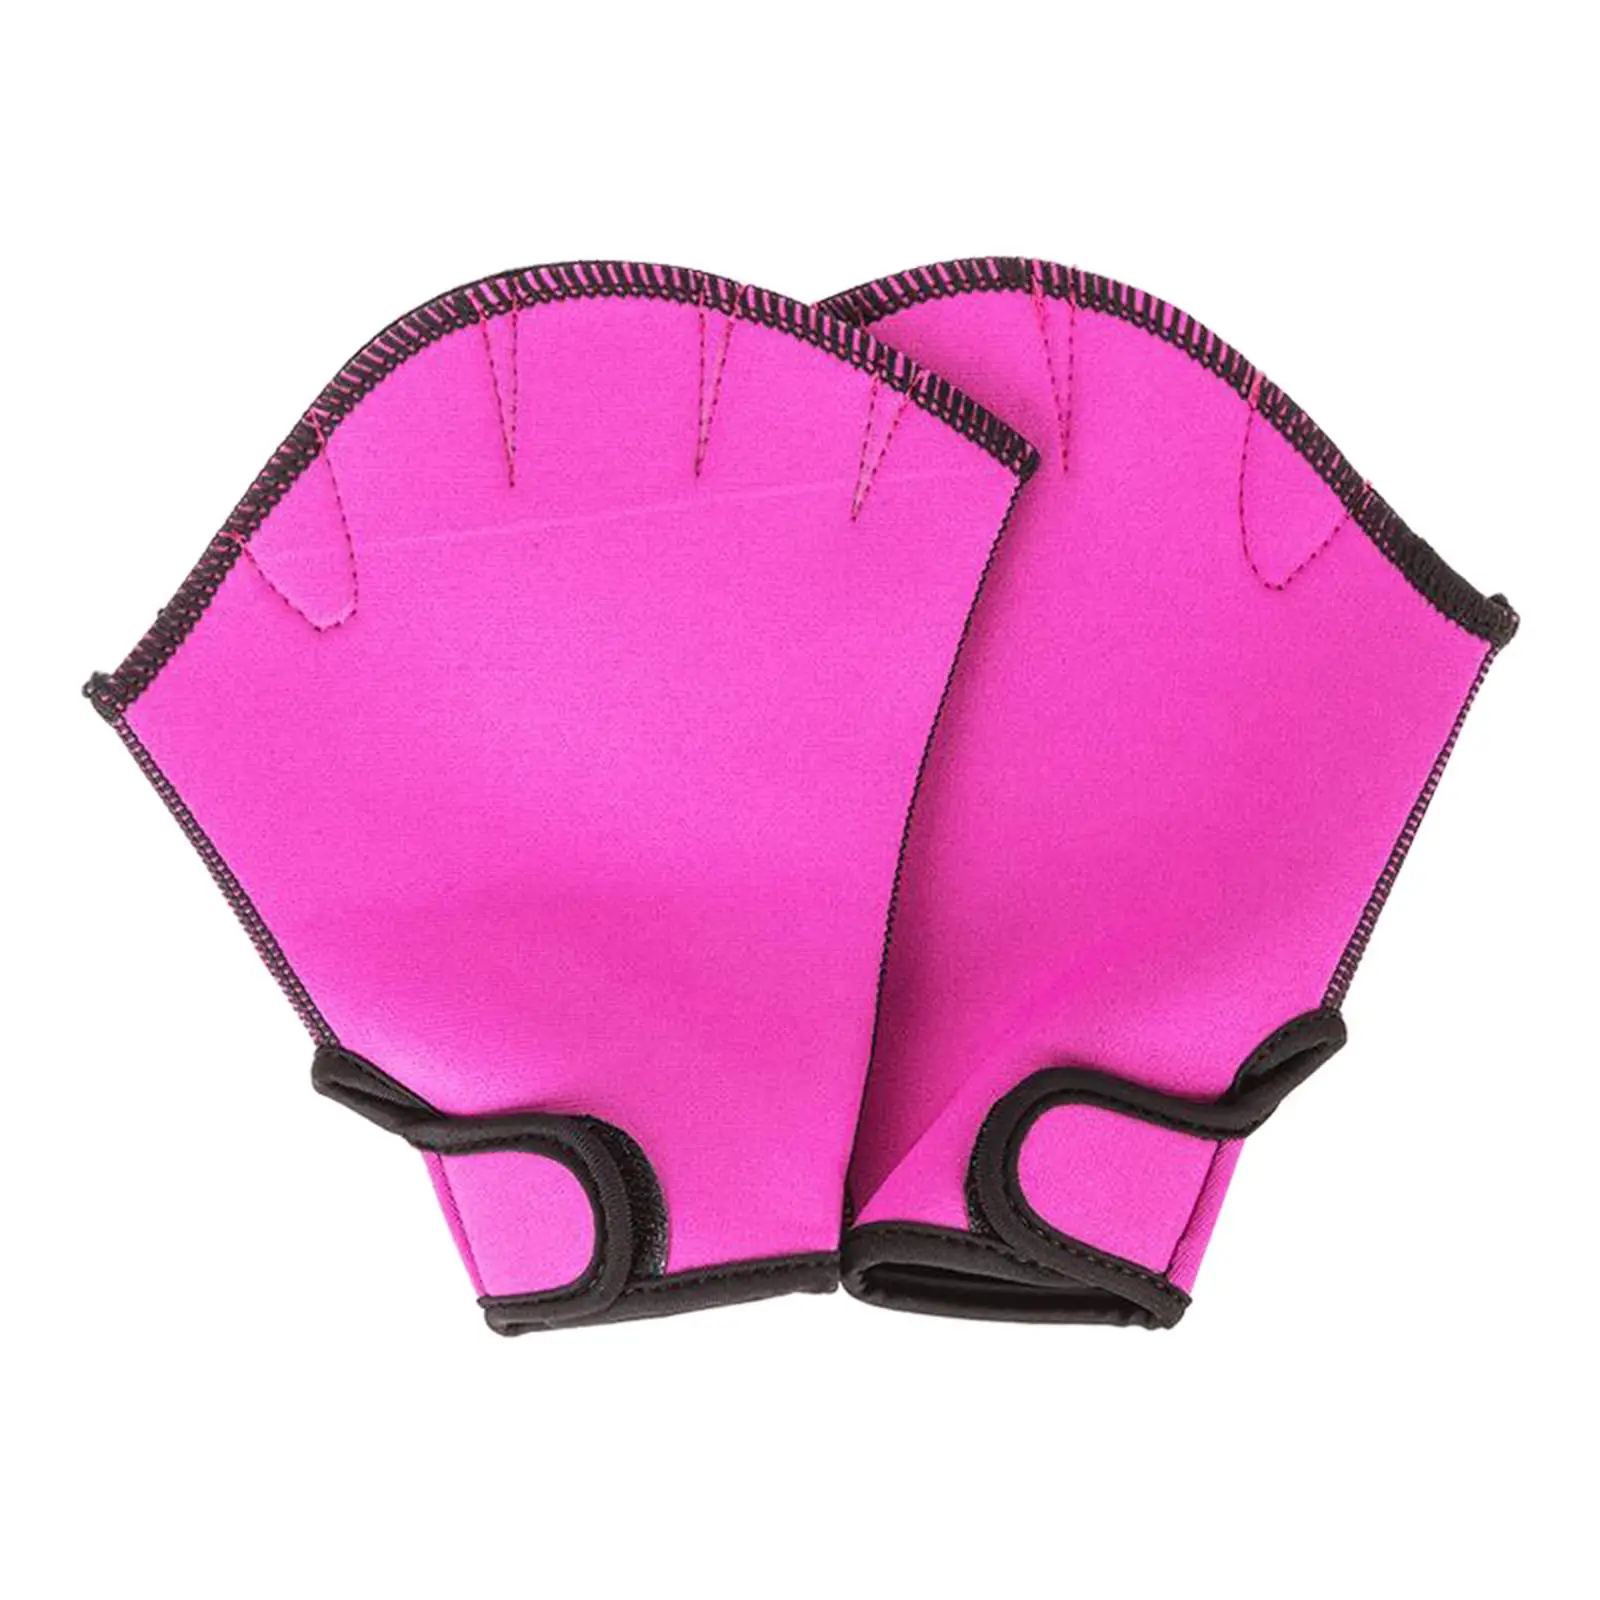 2x 1 Pair Unisex Adult Water Gloves Water Shaped Mesh Swimming Gloves  Snorkeling Surfing Gloves